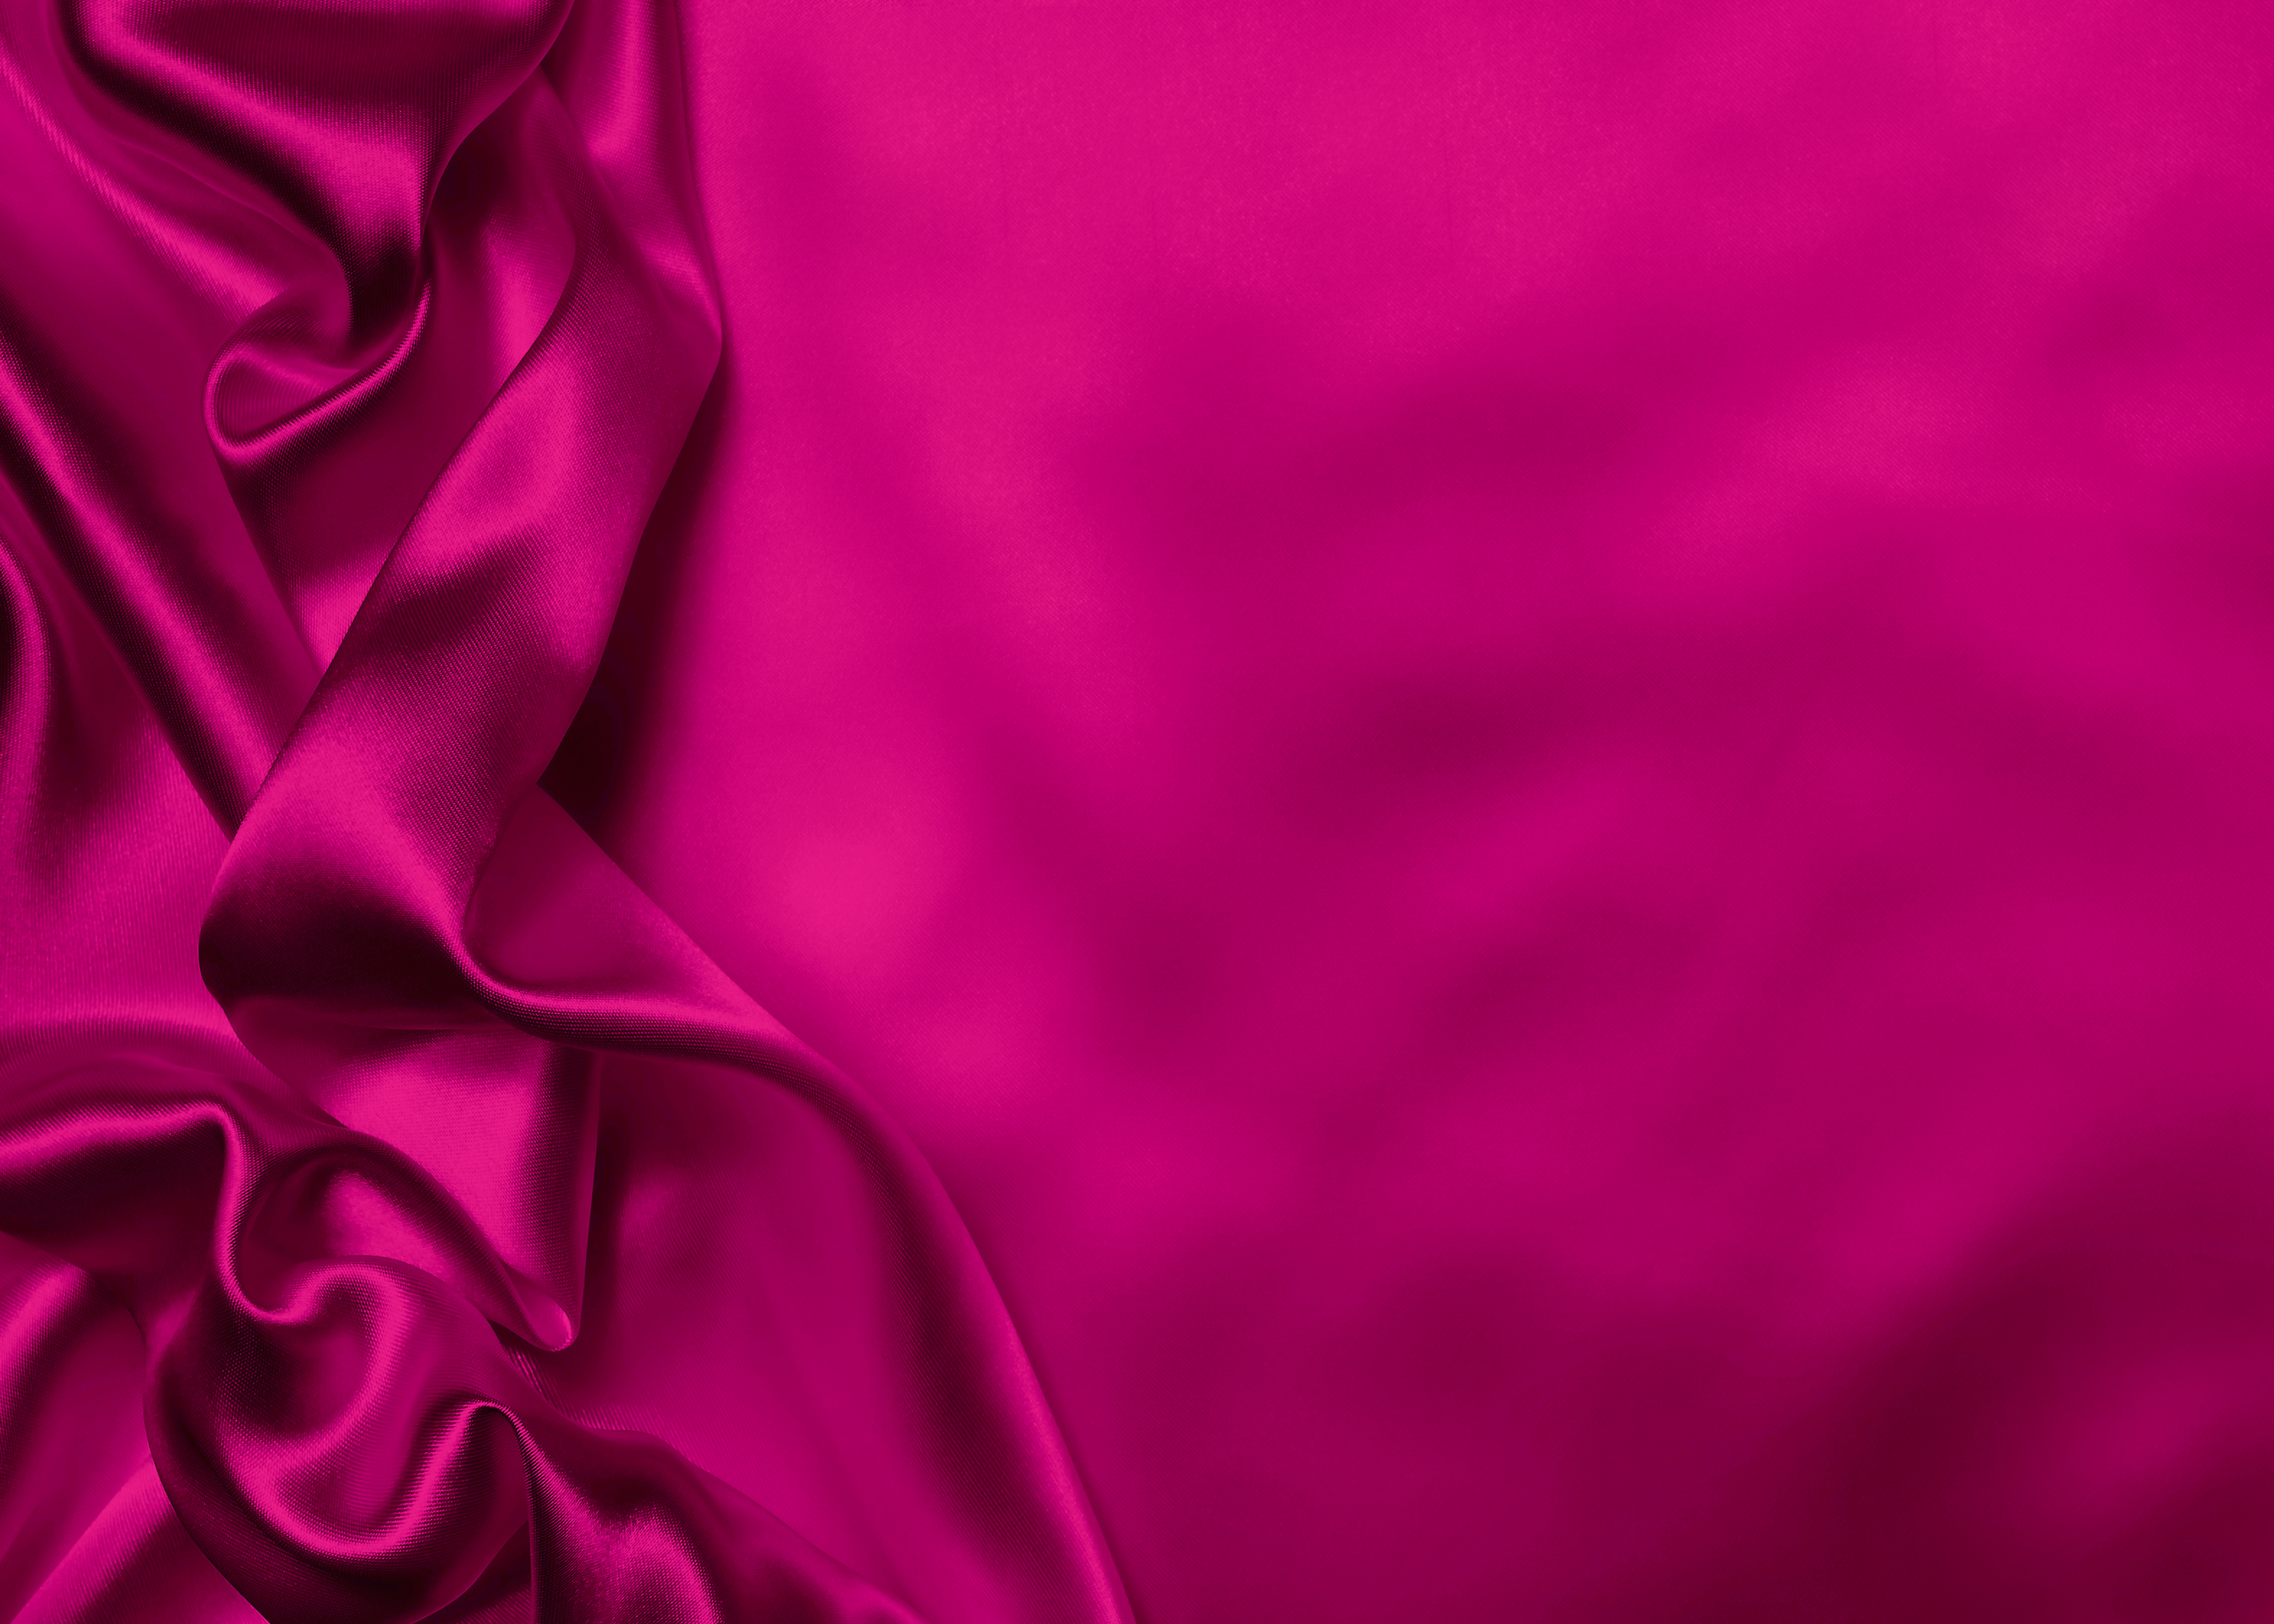 Pink Satin Background | Gallery Yopriceville - High-Quality Images ...